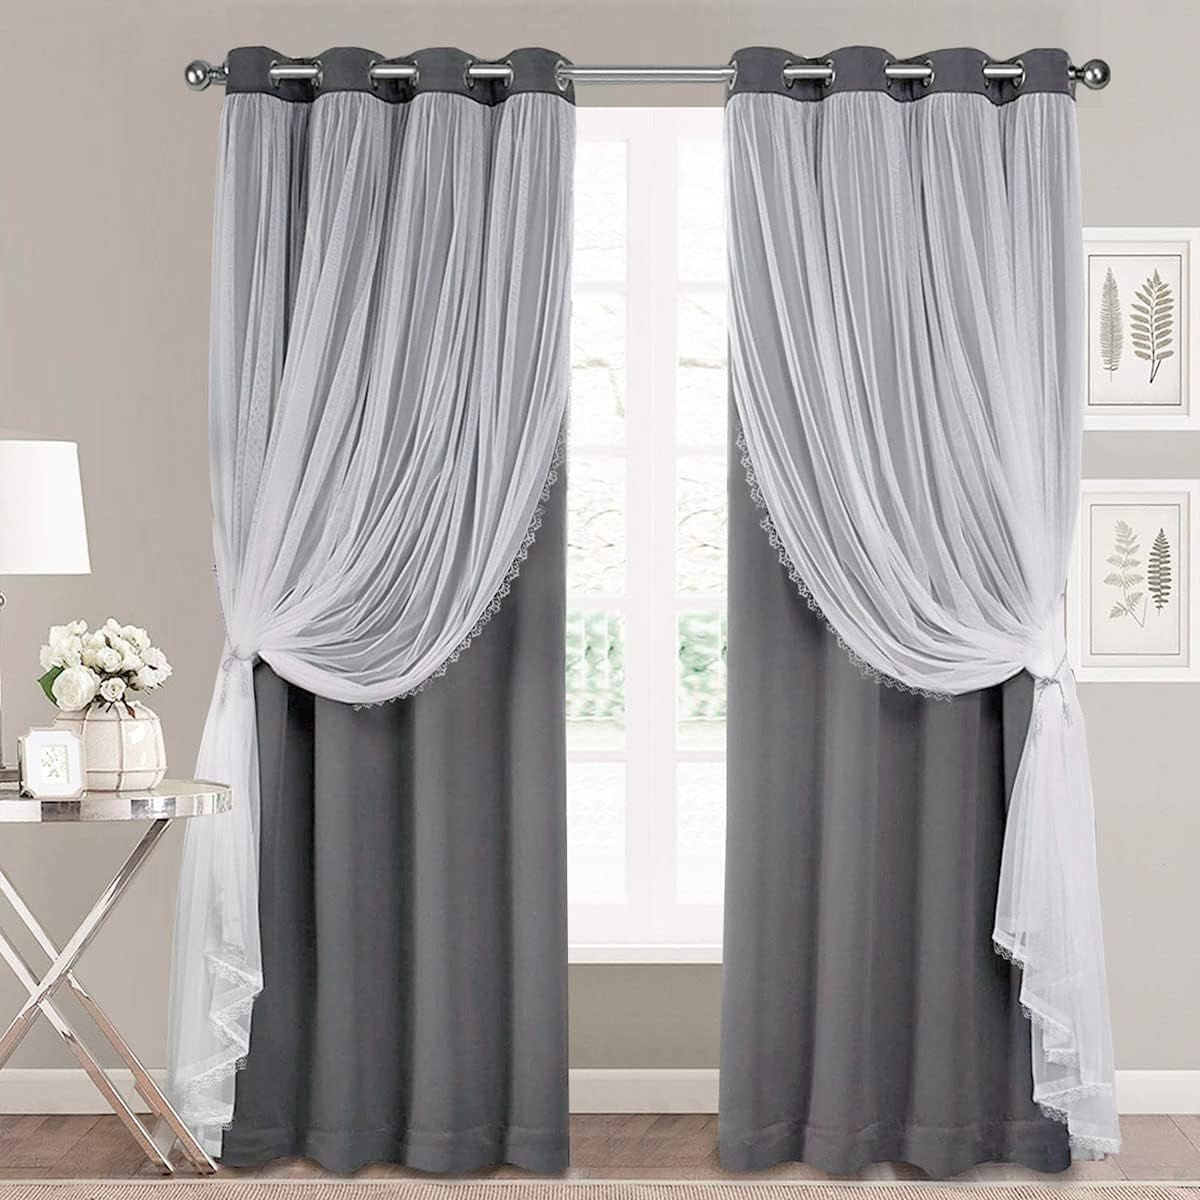 Pink Blackout Curtains 84 Inch Length - Double Layers Princess Girls Curtains & Draperies Panels for Kids Bedroom Living Room Nursery Pink Lace Hem Room Darkening Curtains, 2 Pcs  SOFJAGETQ Grey 52 X 63 